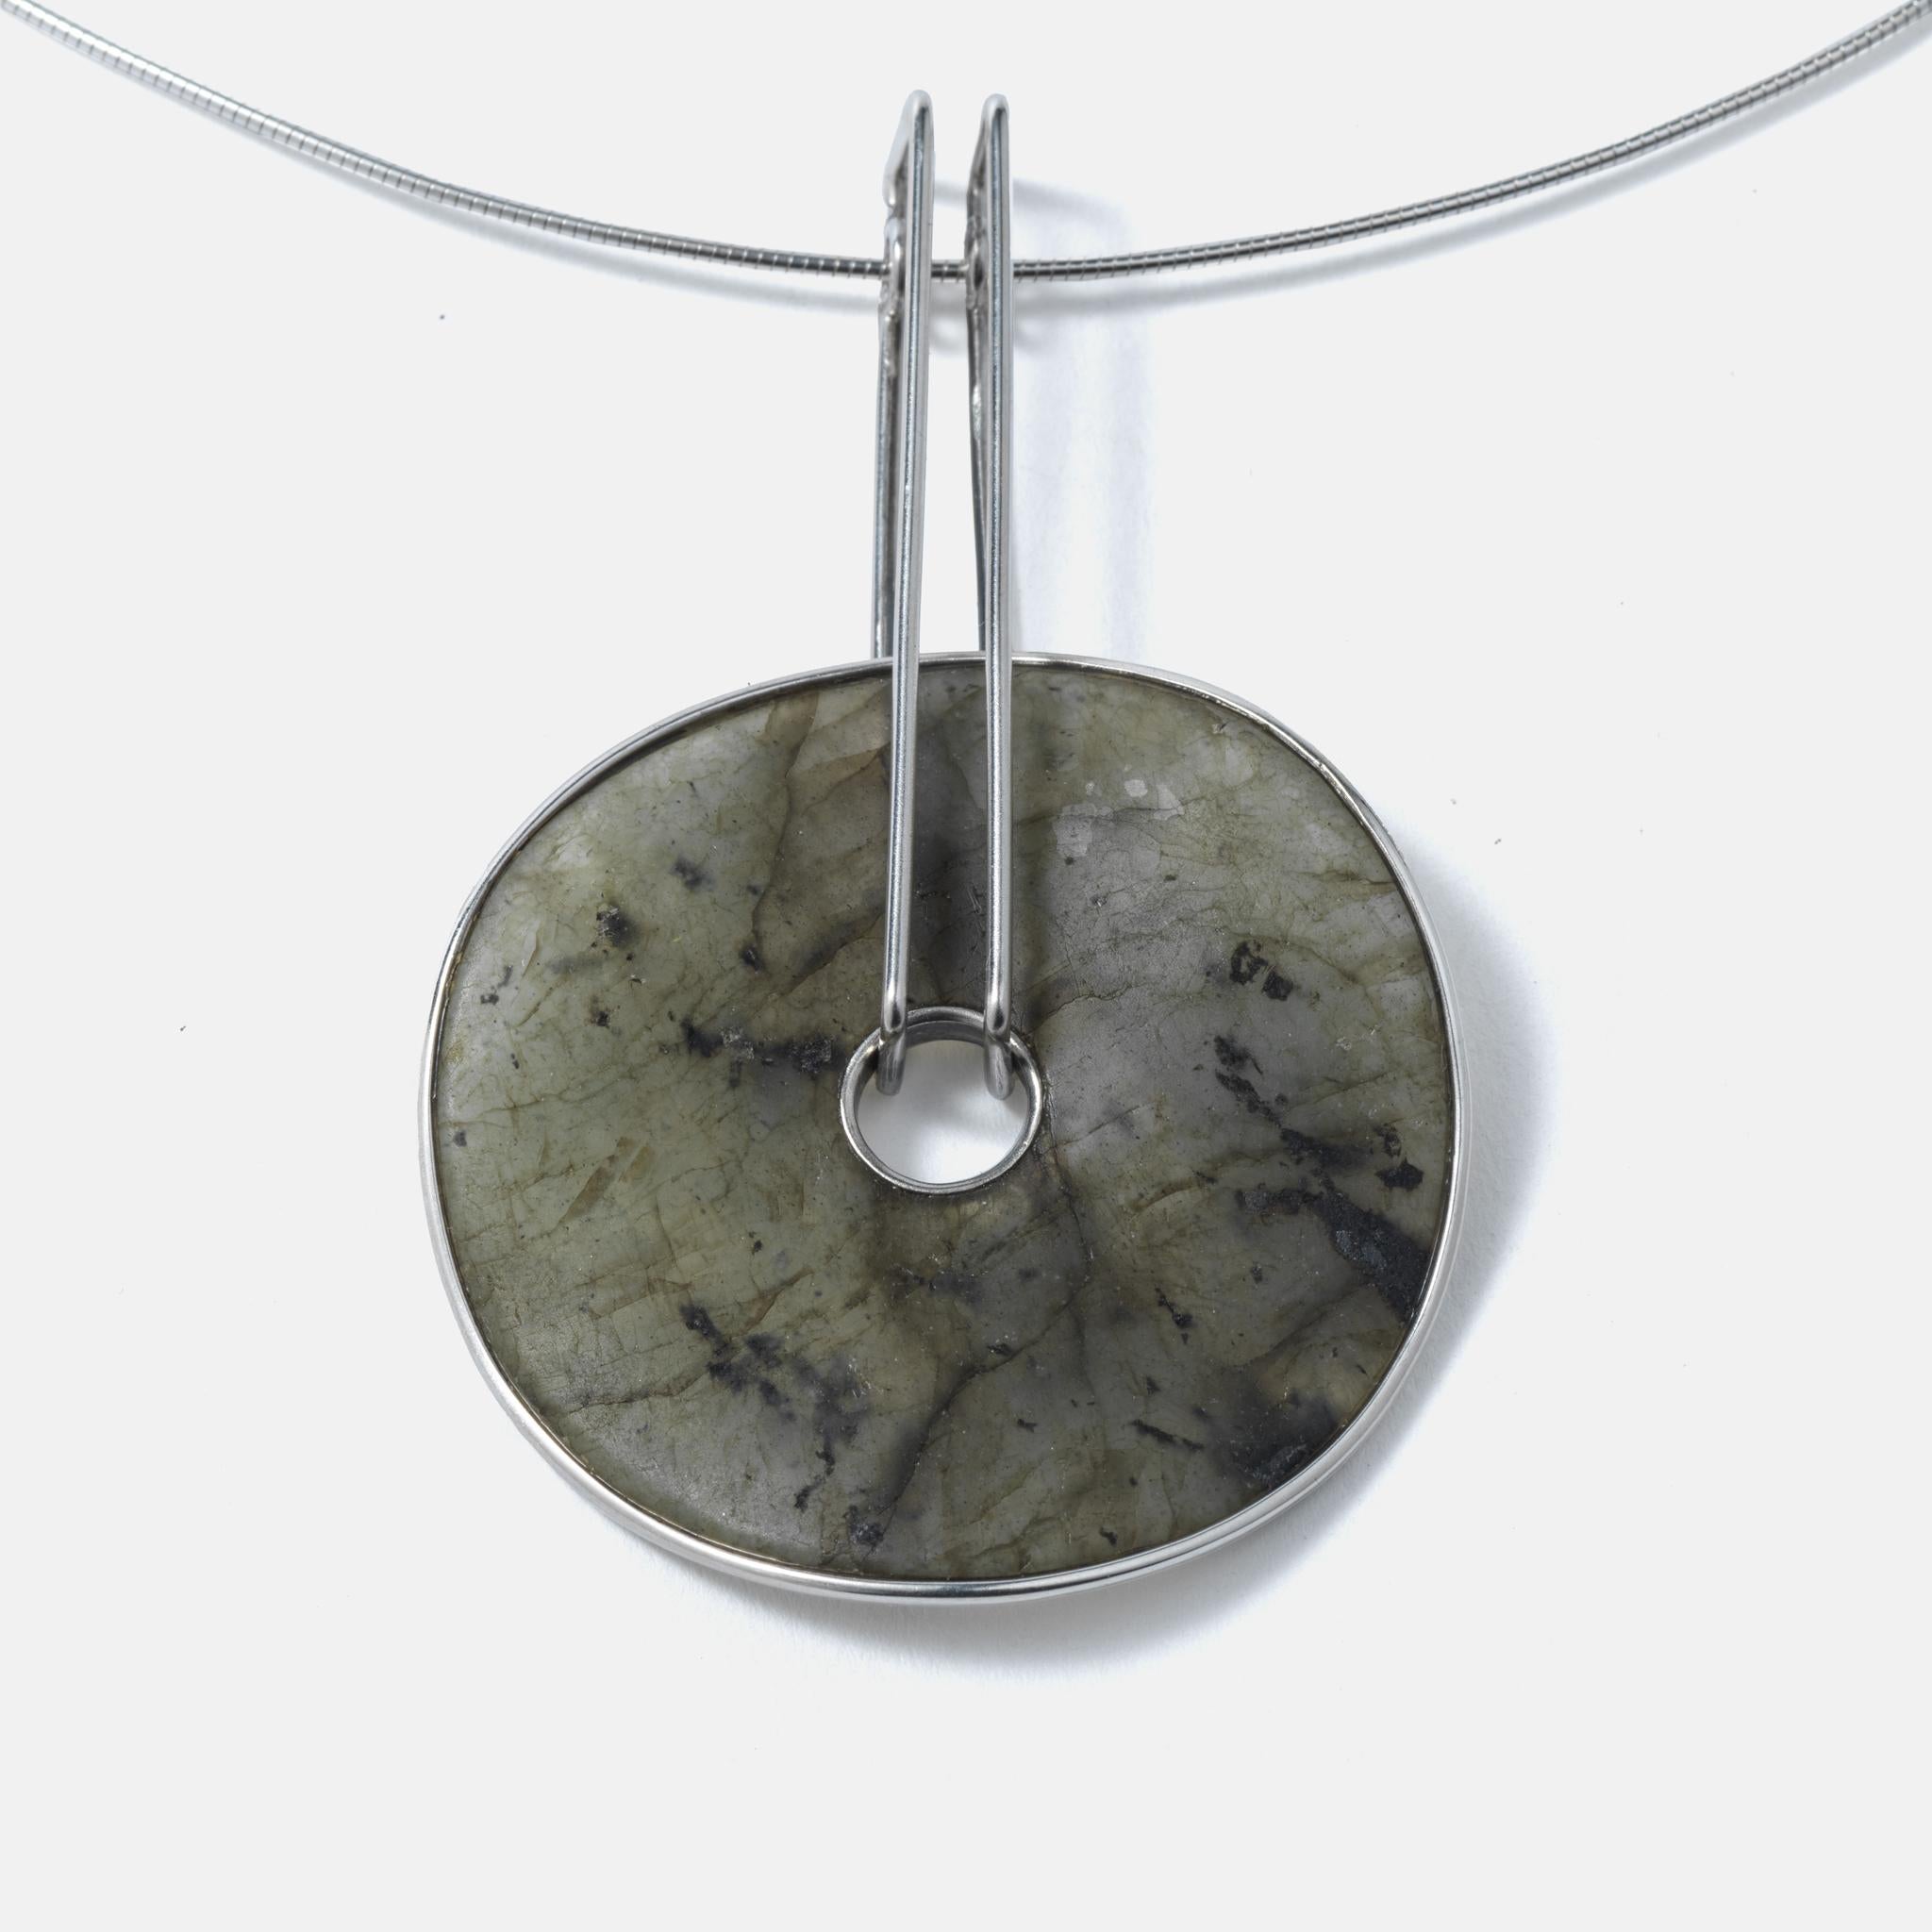 A modern necklace even if its made in 1998. This necklace has a little of the 70s in it as well as a lot of RocknRoll. The artist, Swedish Gunilla Lantz, has clearly been influenced by the Viking Era when she made this design. You can find jewelry